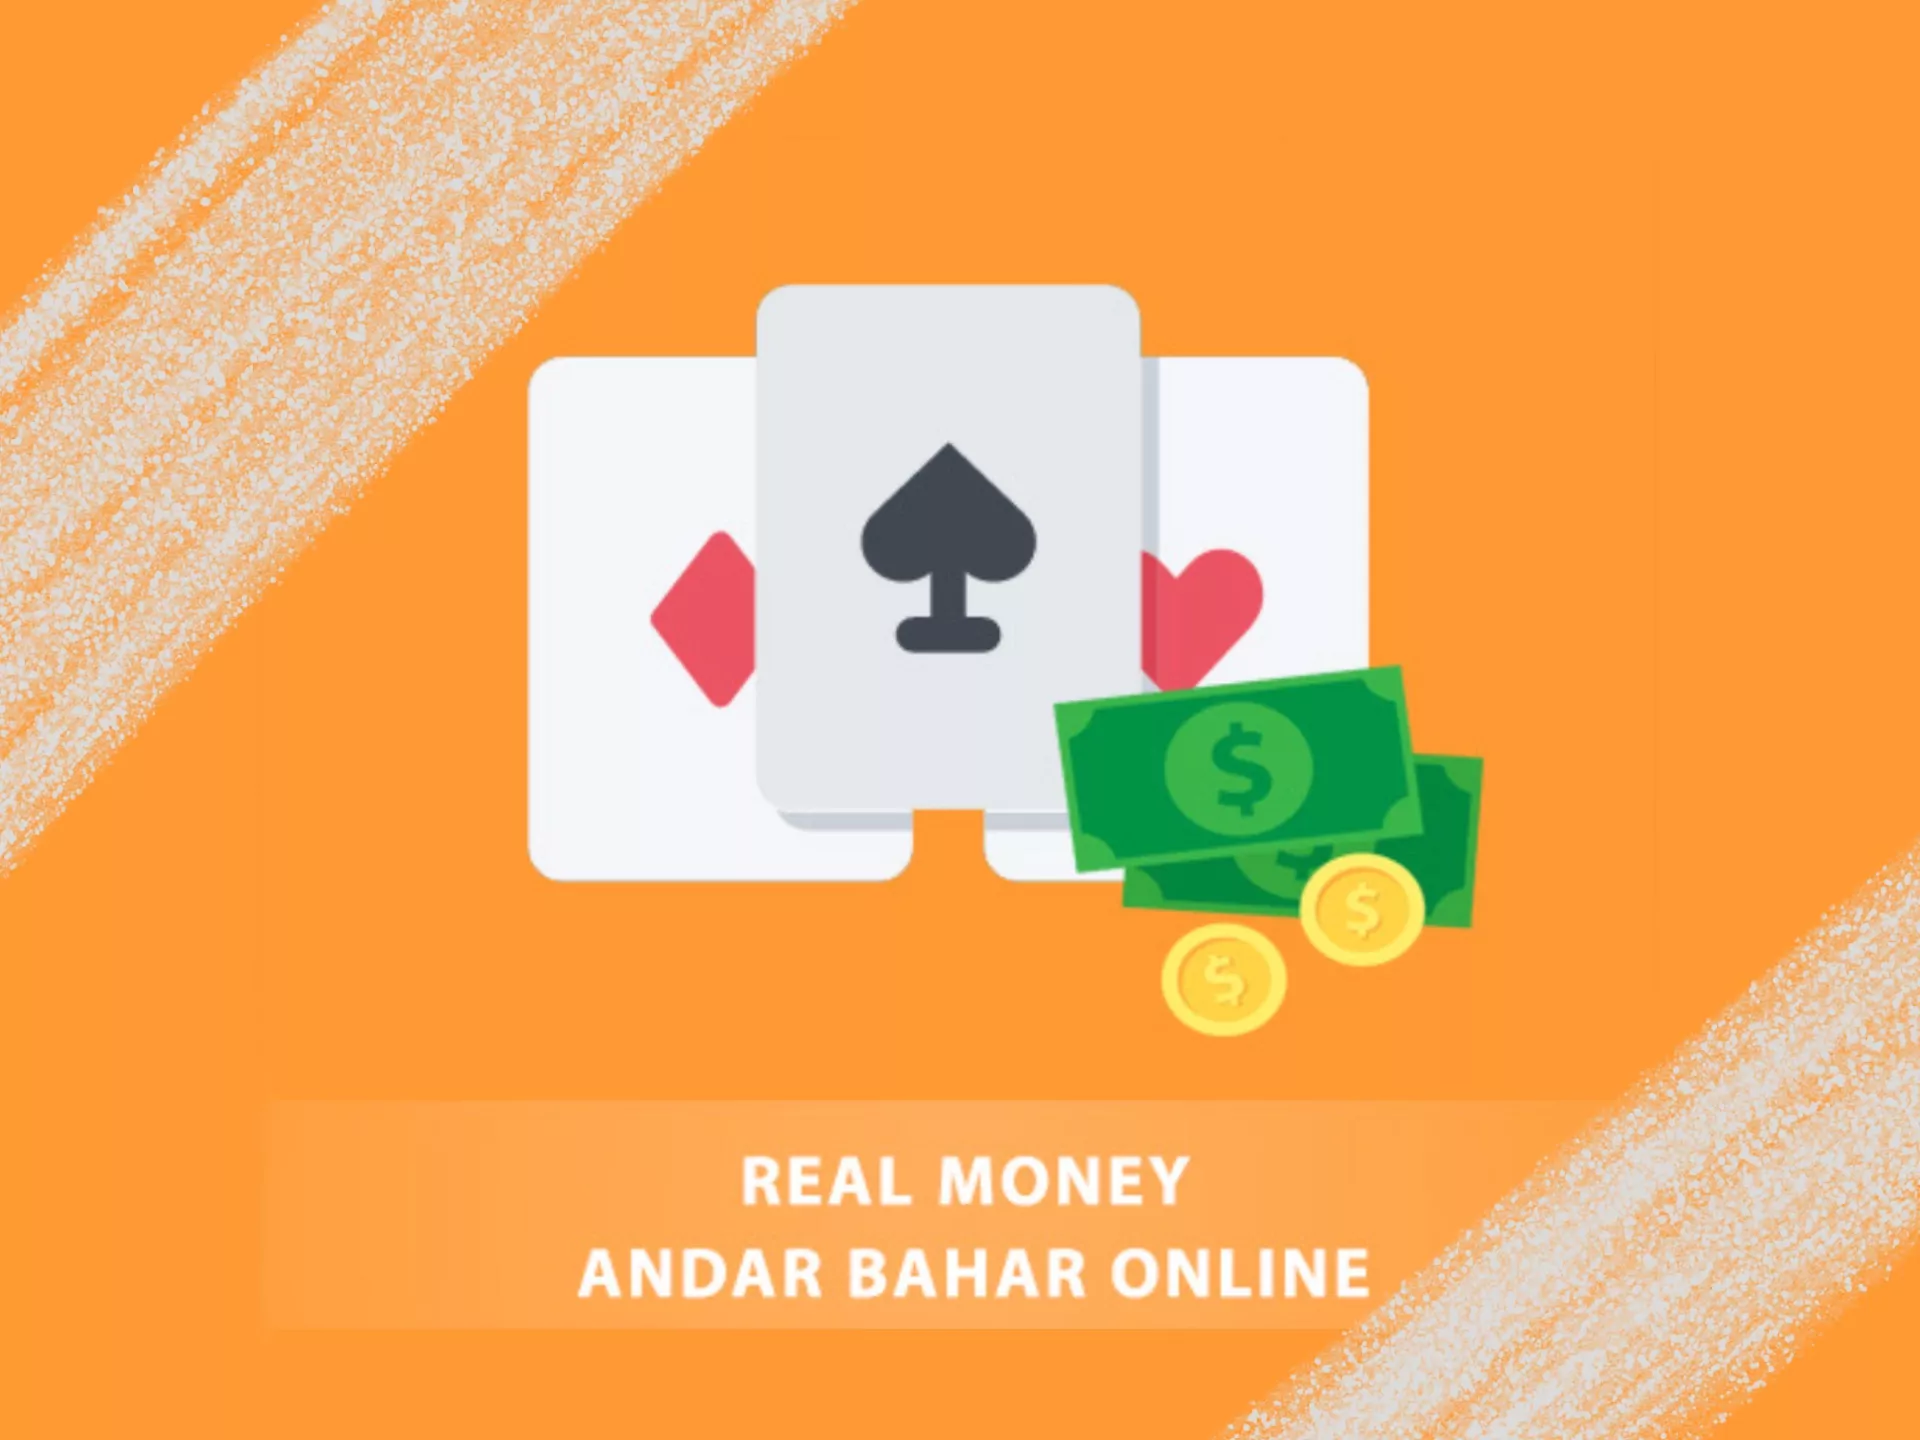 Sign up for an online casino and play one of the most favorite Indian game Andar Bahar.